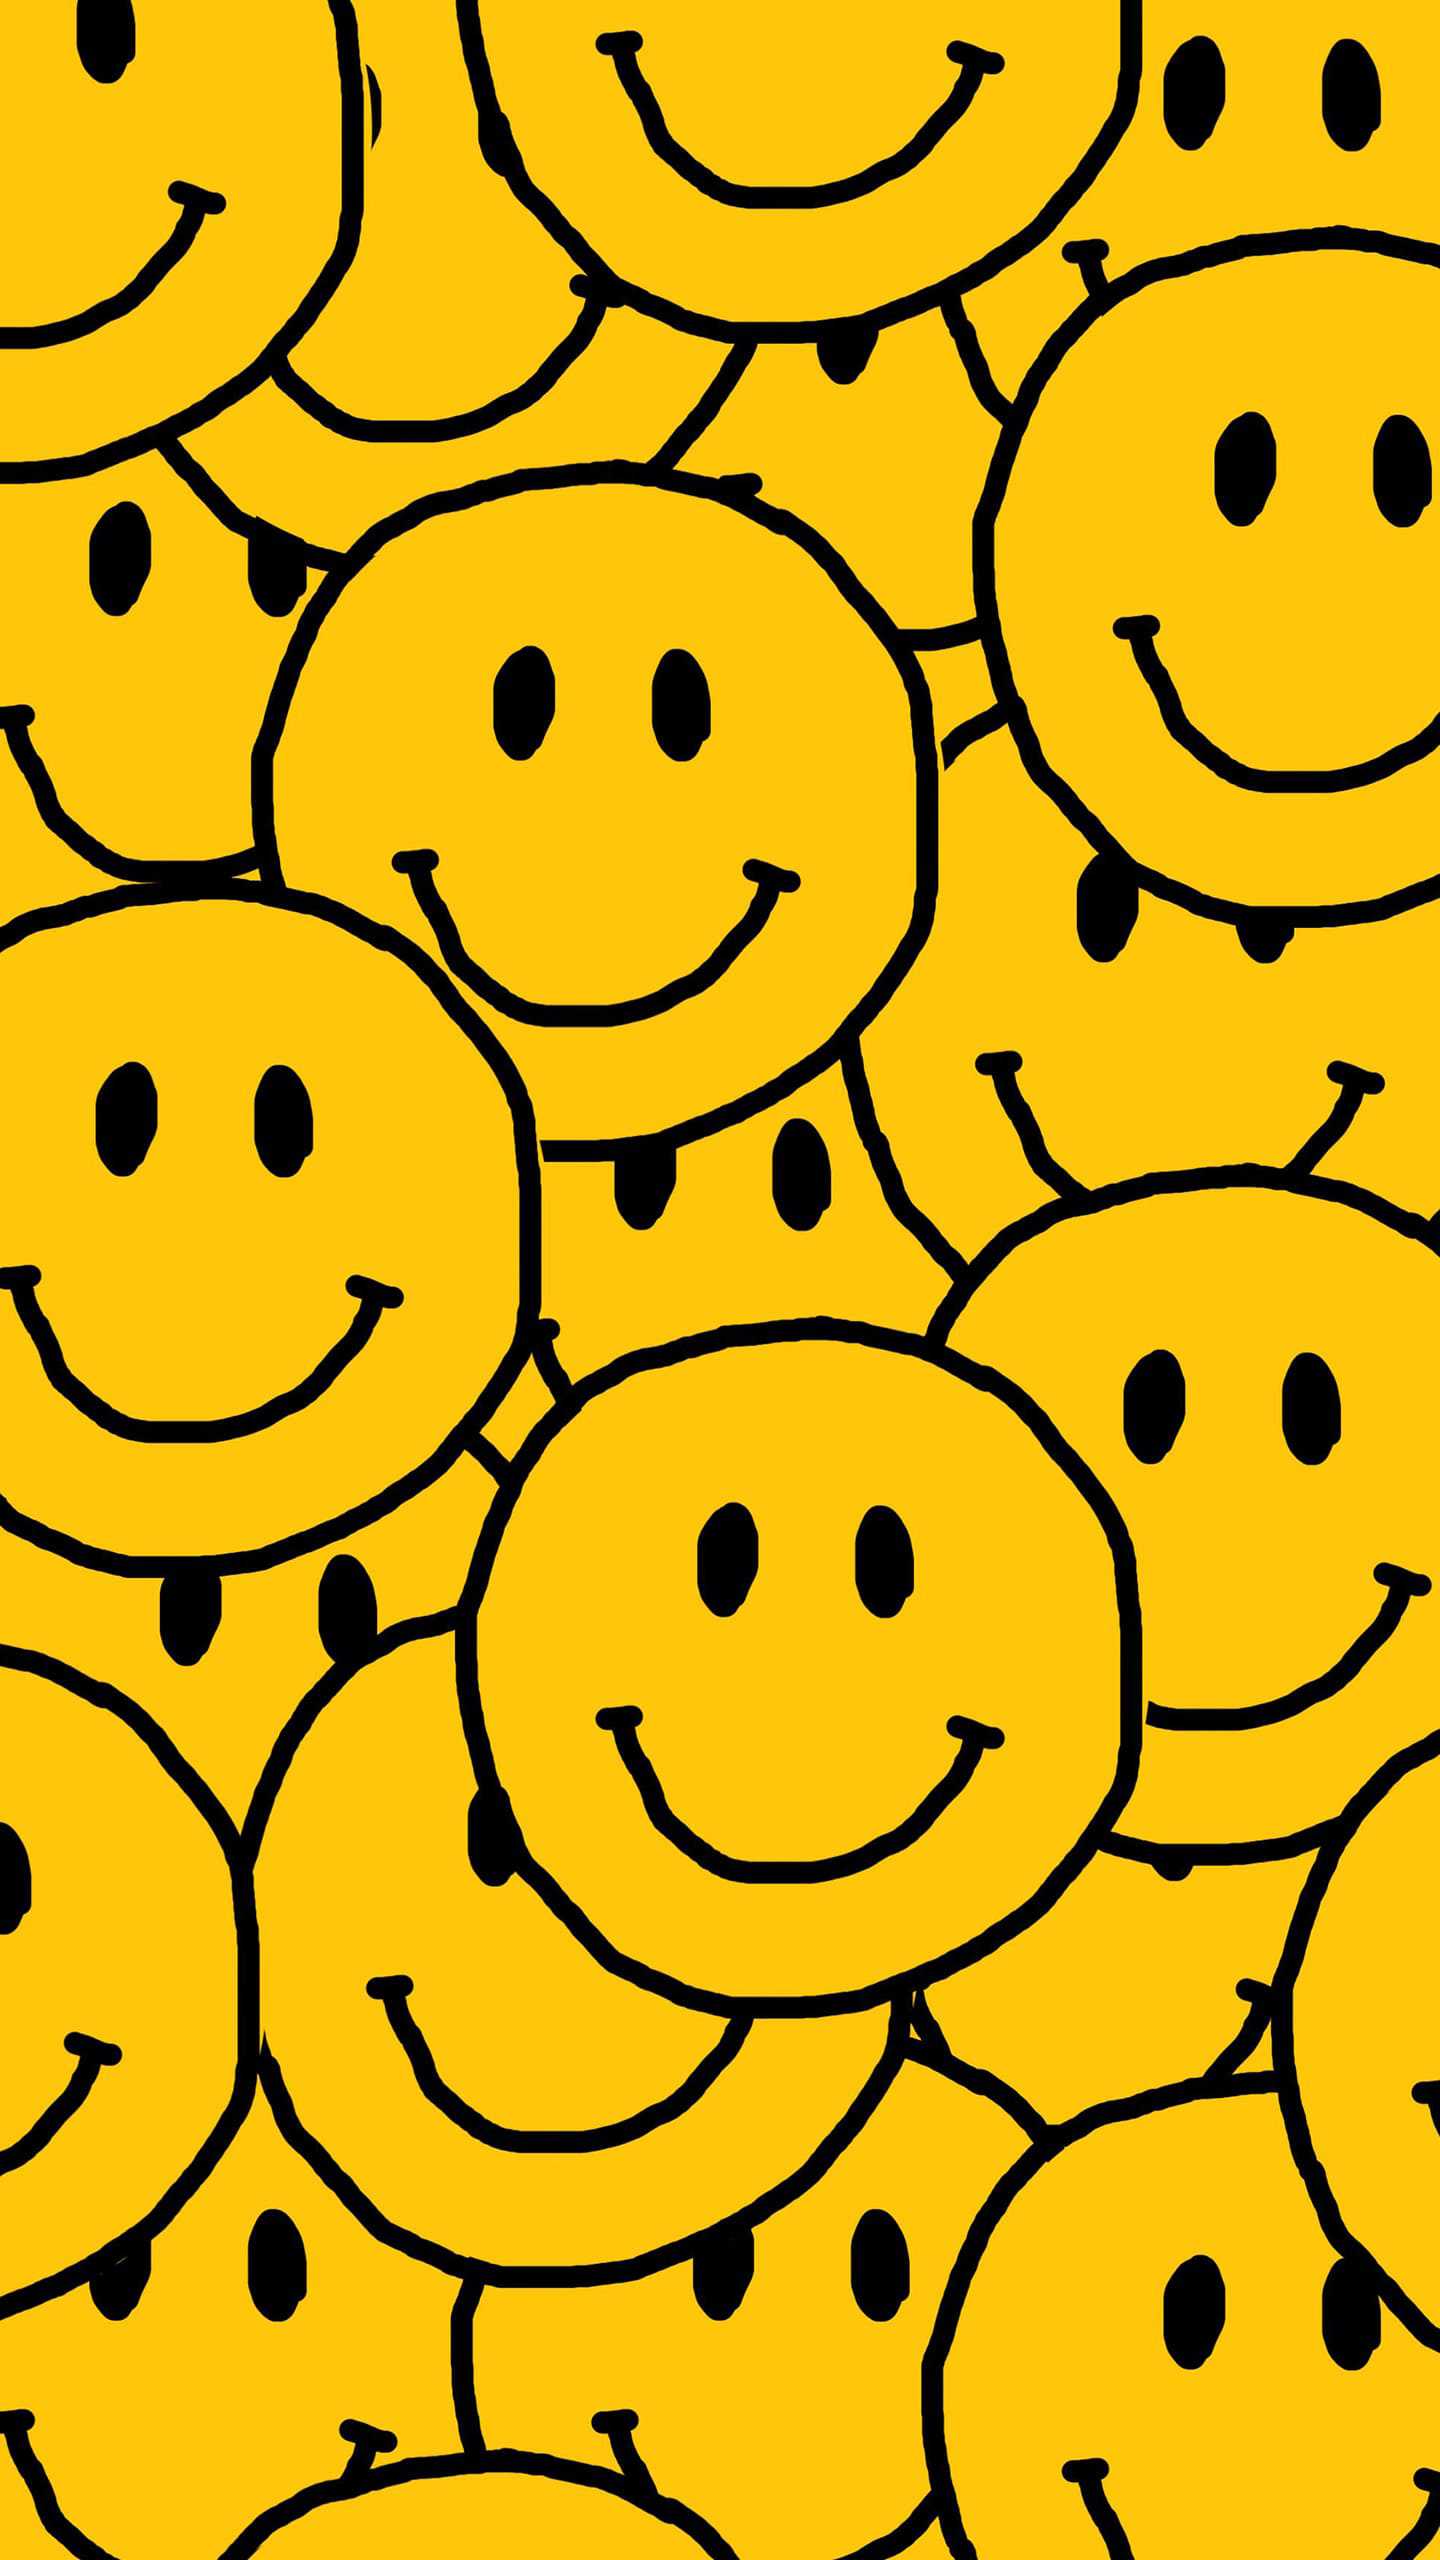 A lot of smiley faces on a yellow background - Smiley